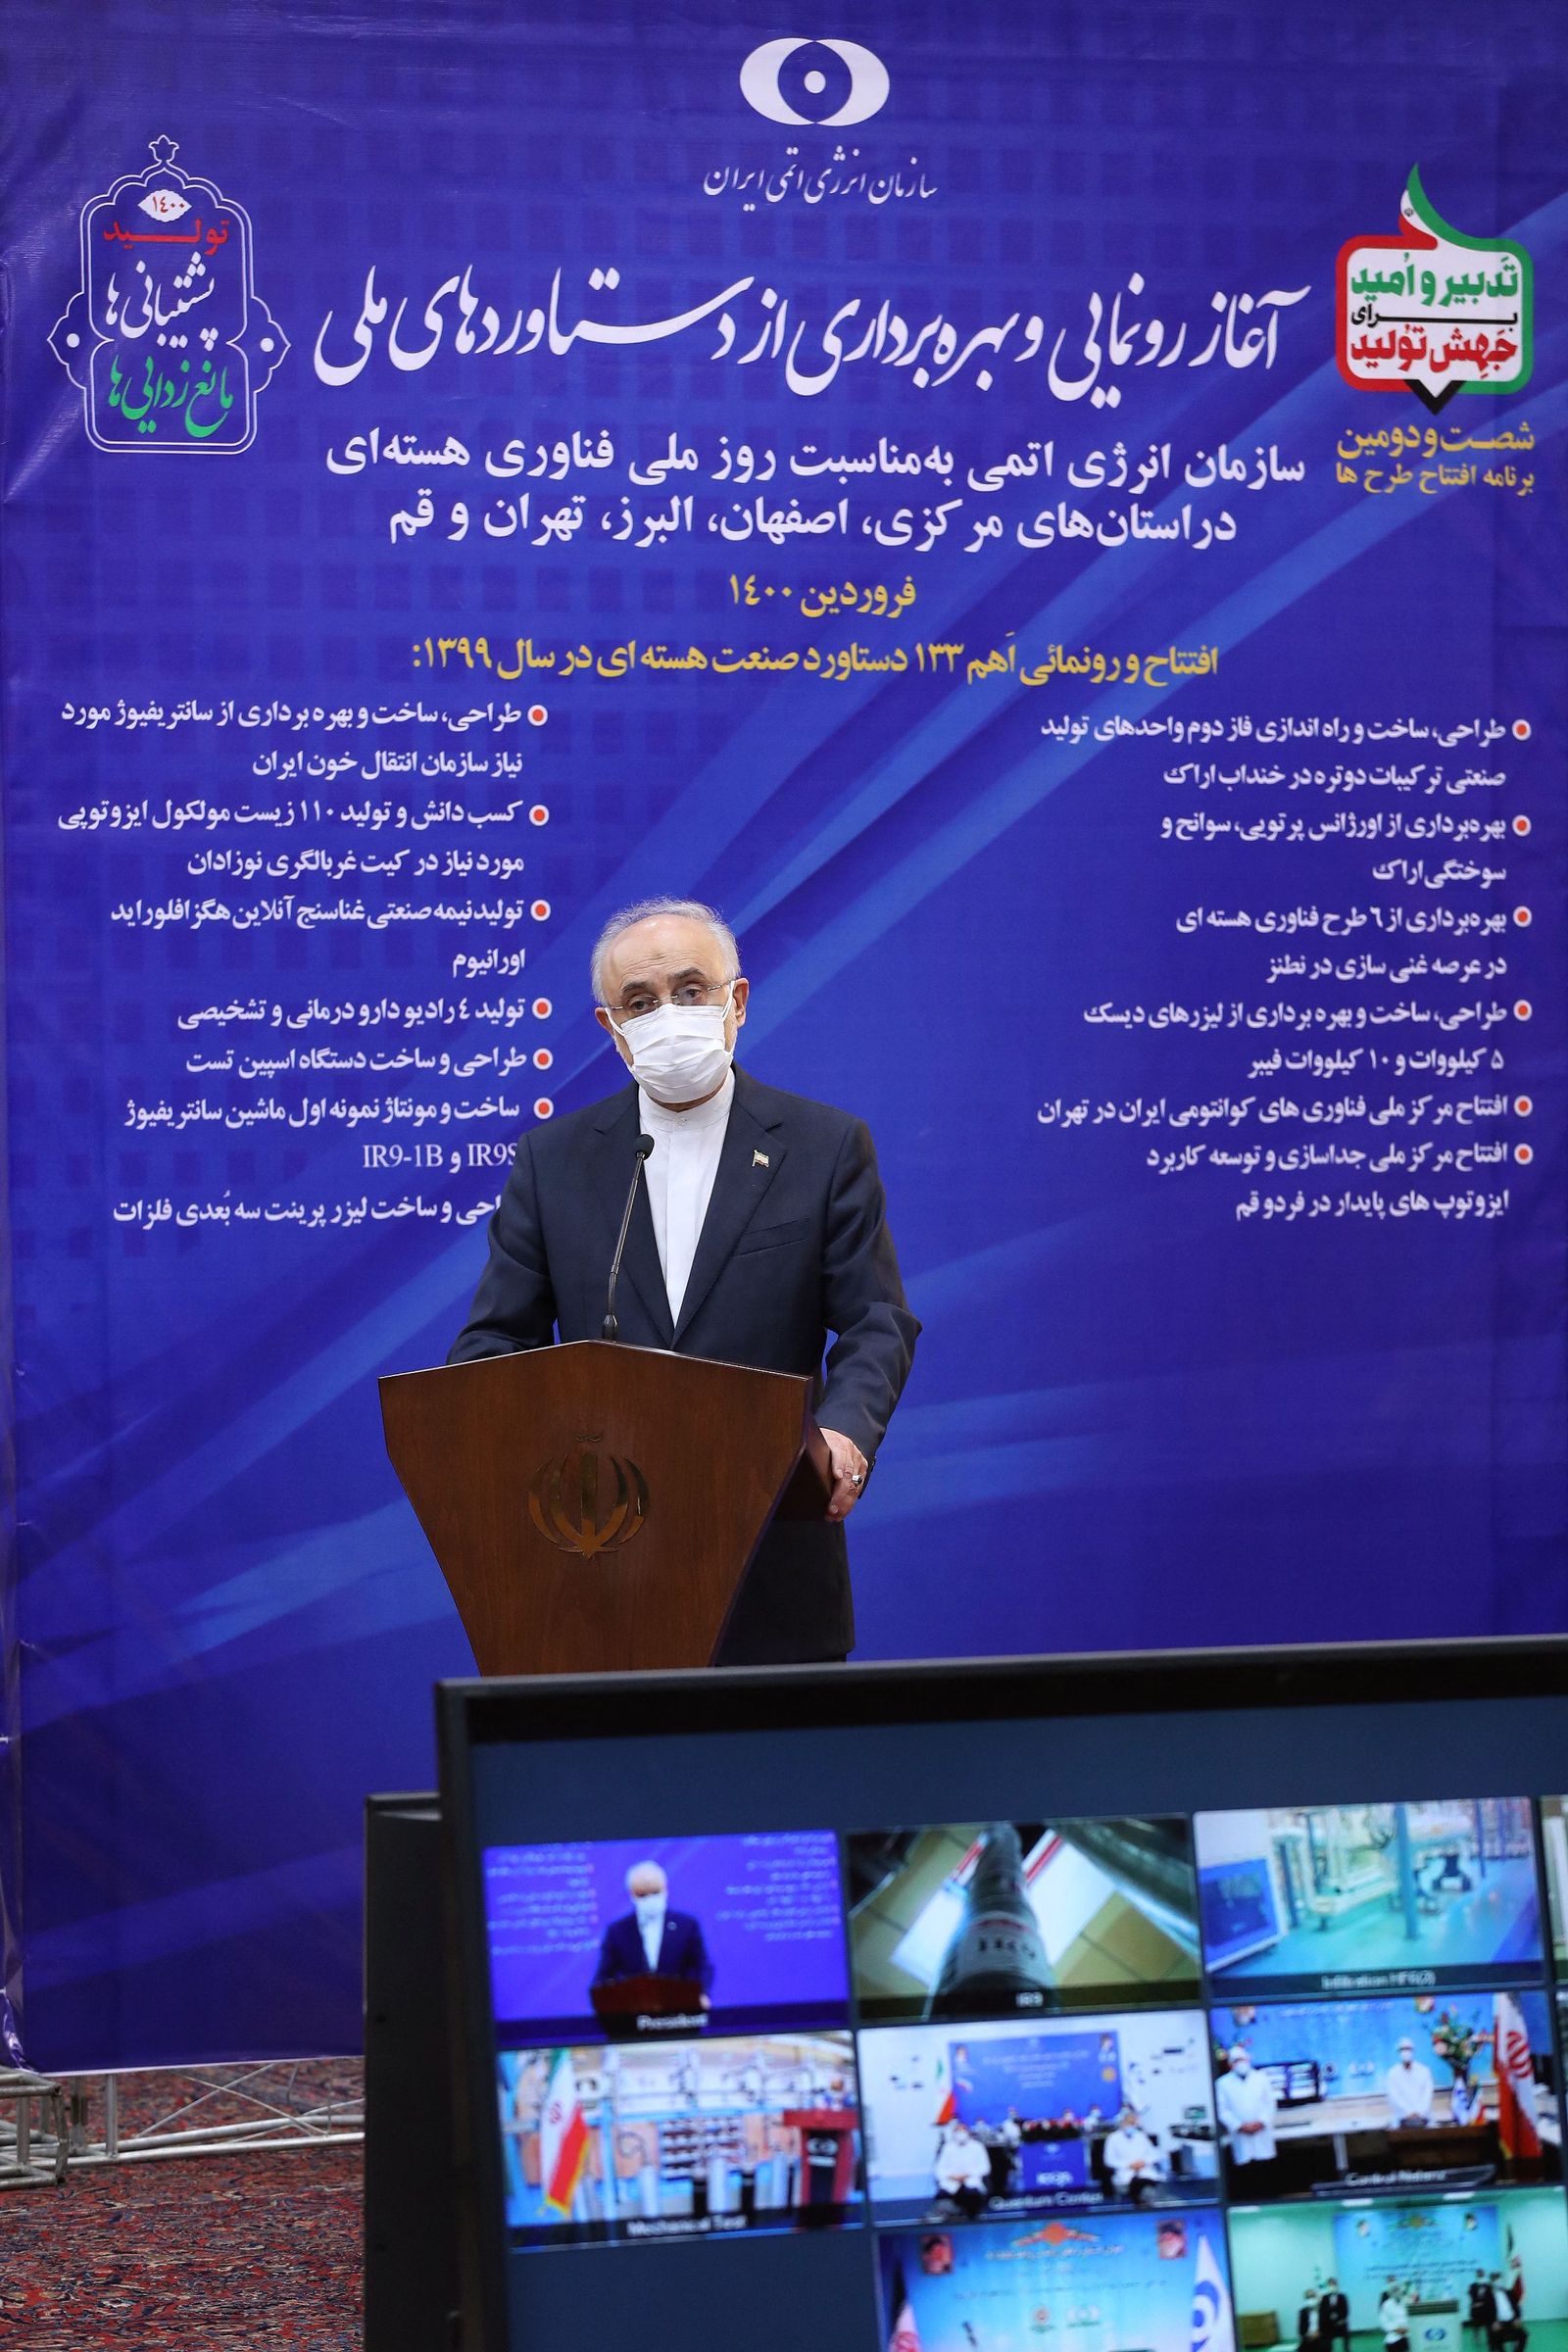 A handout picture provided by the Iranian presidential office on April 10, 2021, shows   the head of the Atomic Energy Organisation of Iran (AEIO) Ali Akbar Salehi speaking behind a screen of a teleconference with views of centrifuges and devices at Iran's Natanz uranium enrichment plant, on Iran's National Nuclear Technology Day, in the capital Tehran. - Iran announced today it has started up advanced uranium enrichment centrifuges in a breach of its undertakings under a troubled 2015 nuclear deal, days after talks on rescuing it got underway.
President Hassan Rouhani officially inaugurated the cascades of 164 IR-6 centrifuges and 30 IR-5 devices at Iran's Natanz uranium enrichment plant in a ceremony broadcast by state television. (Photo by - / Iranian Presidency / AFP) / === RESTRICTED TO EDITORIAL USE - MANDATORY CREDIT 